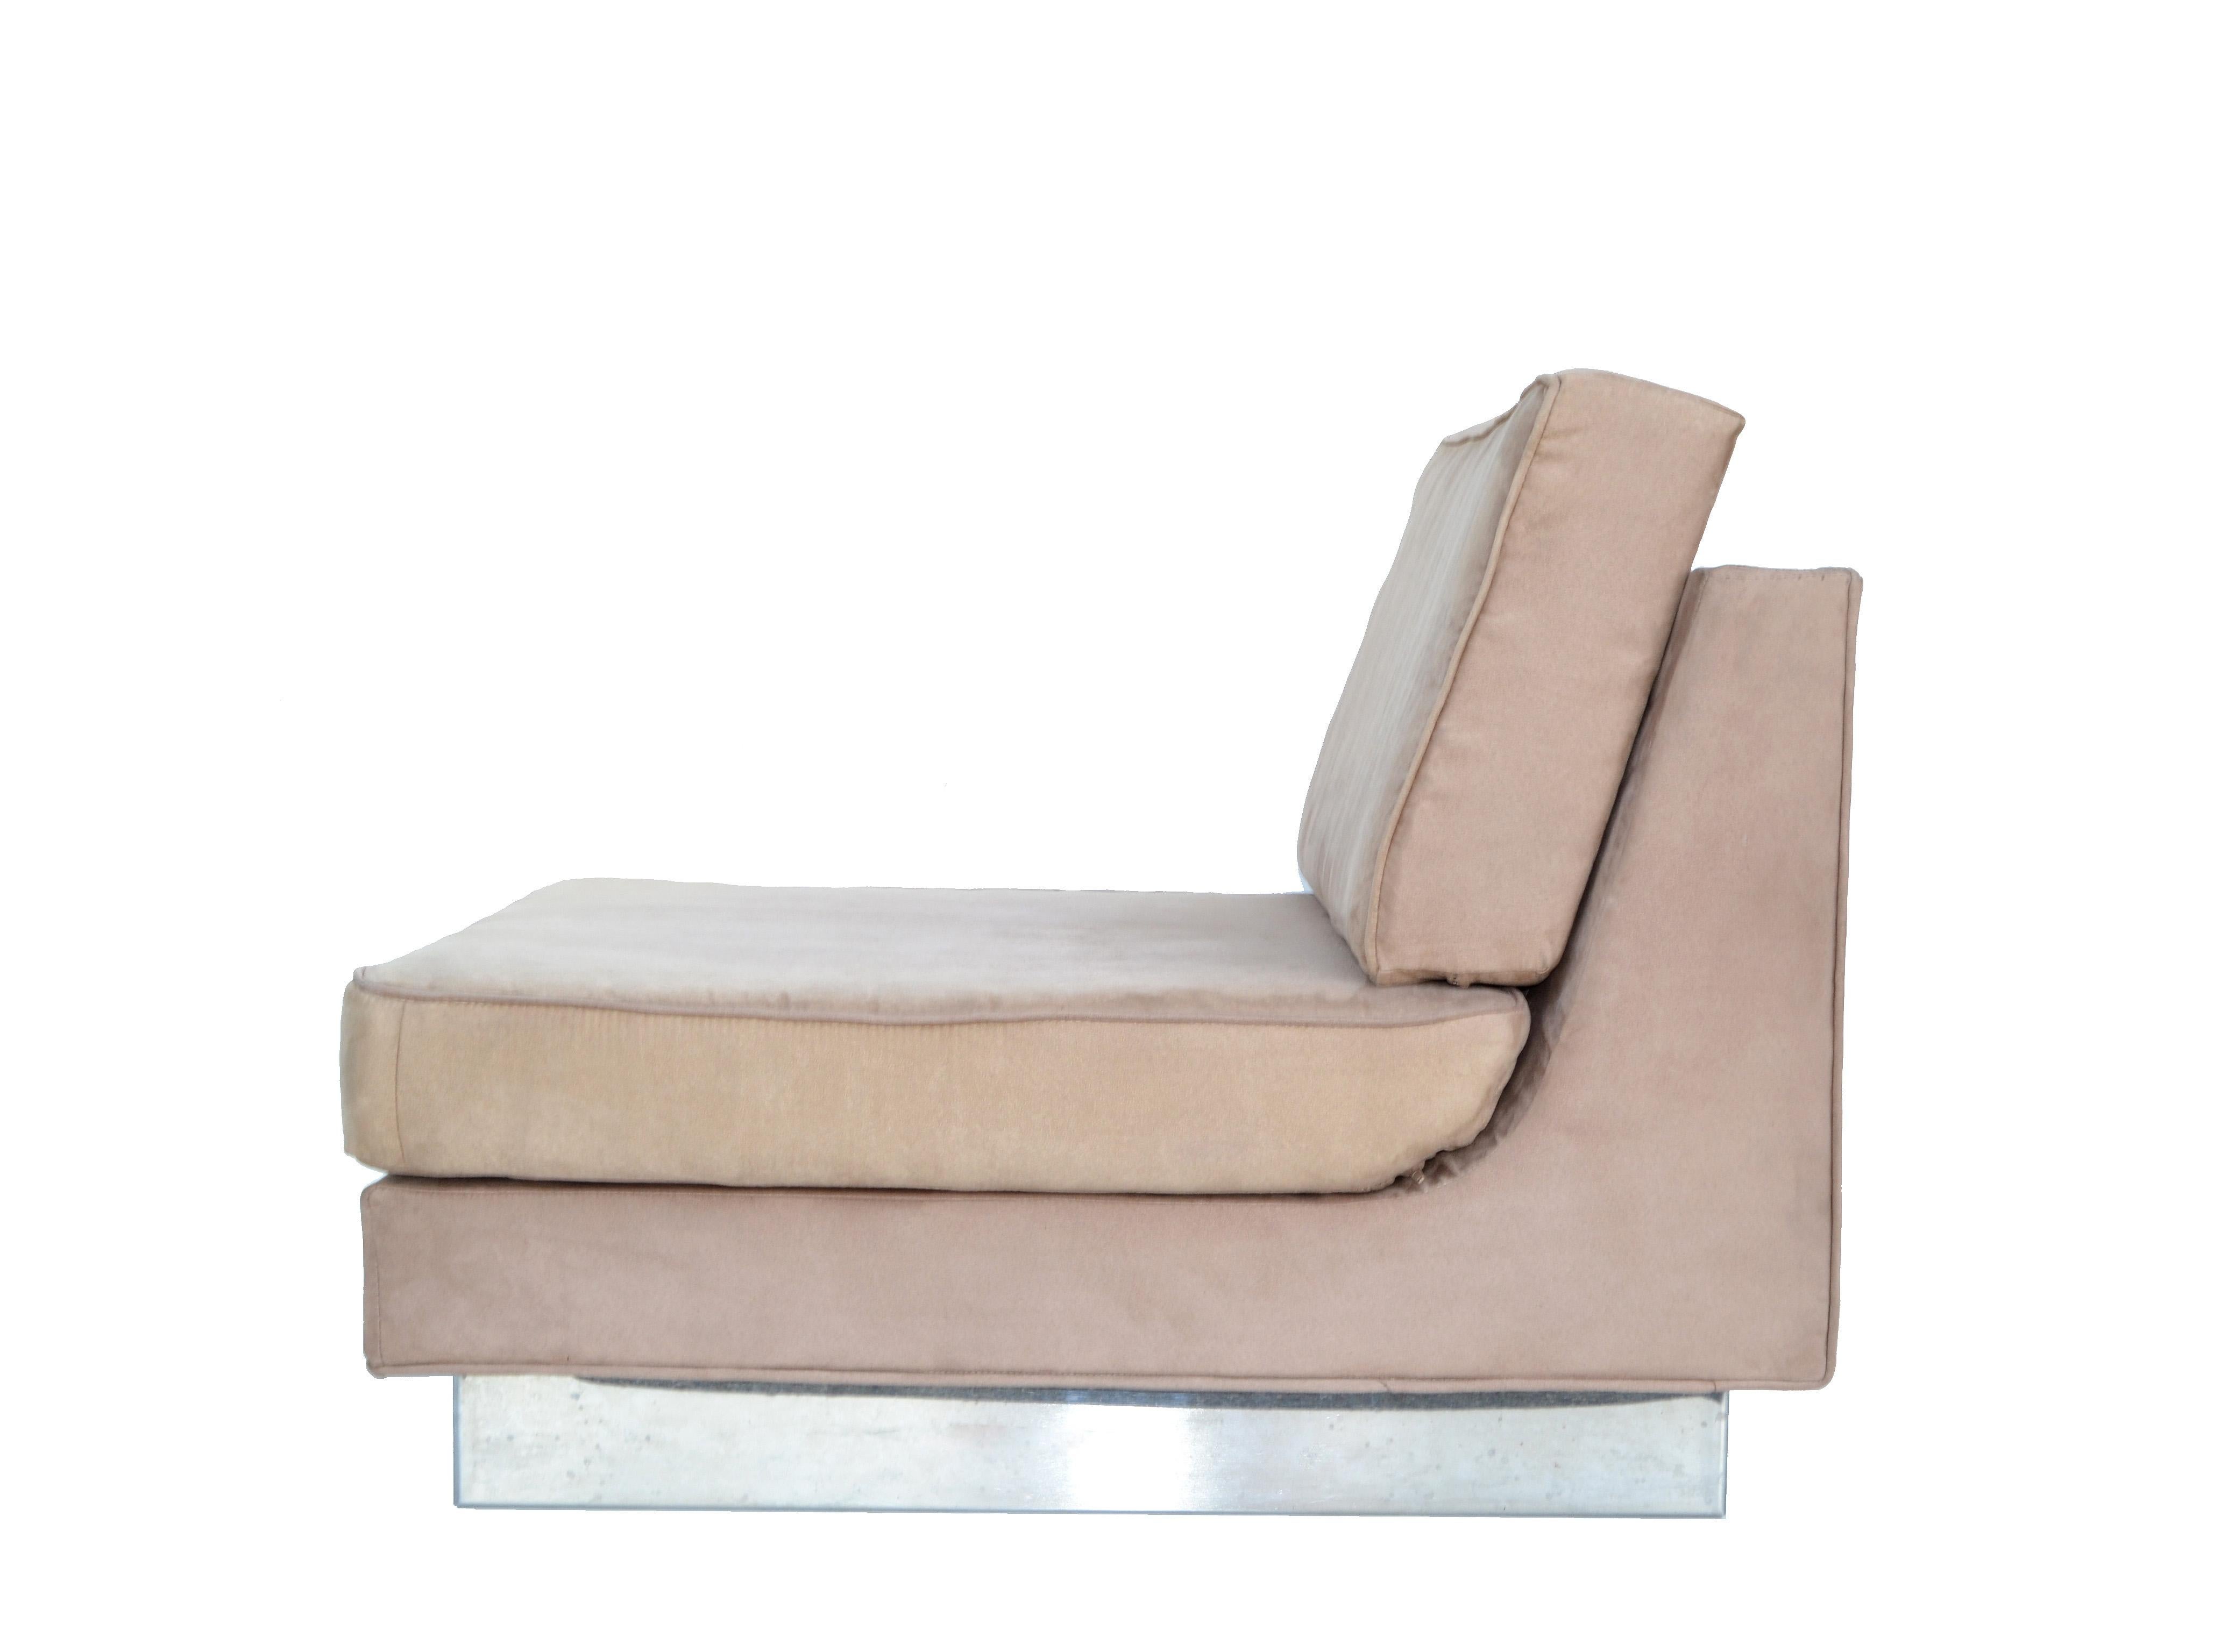 Jacques Charpentier Loveseat & Lounge Chair in Beige Ultrasuede 1970 France For Sale 7